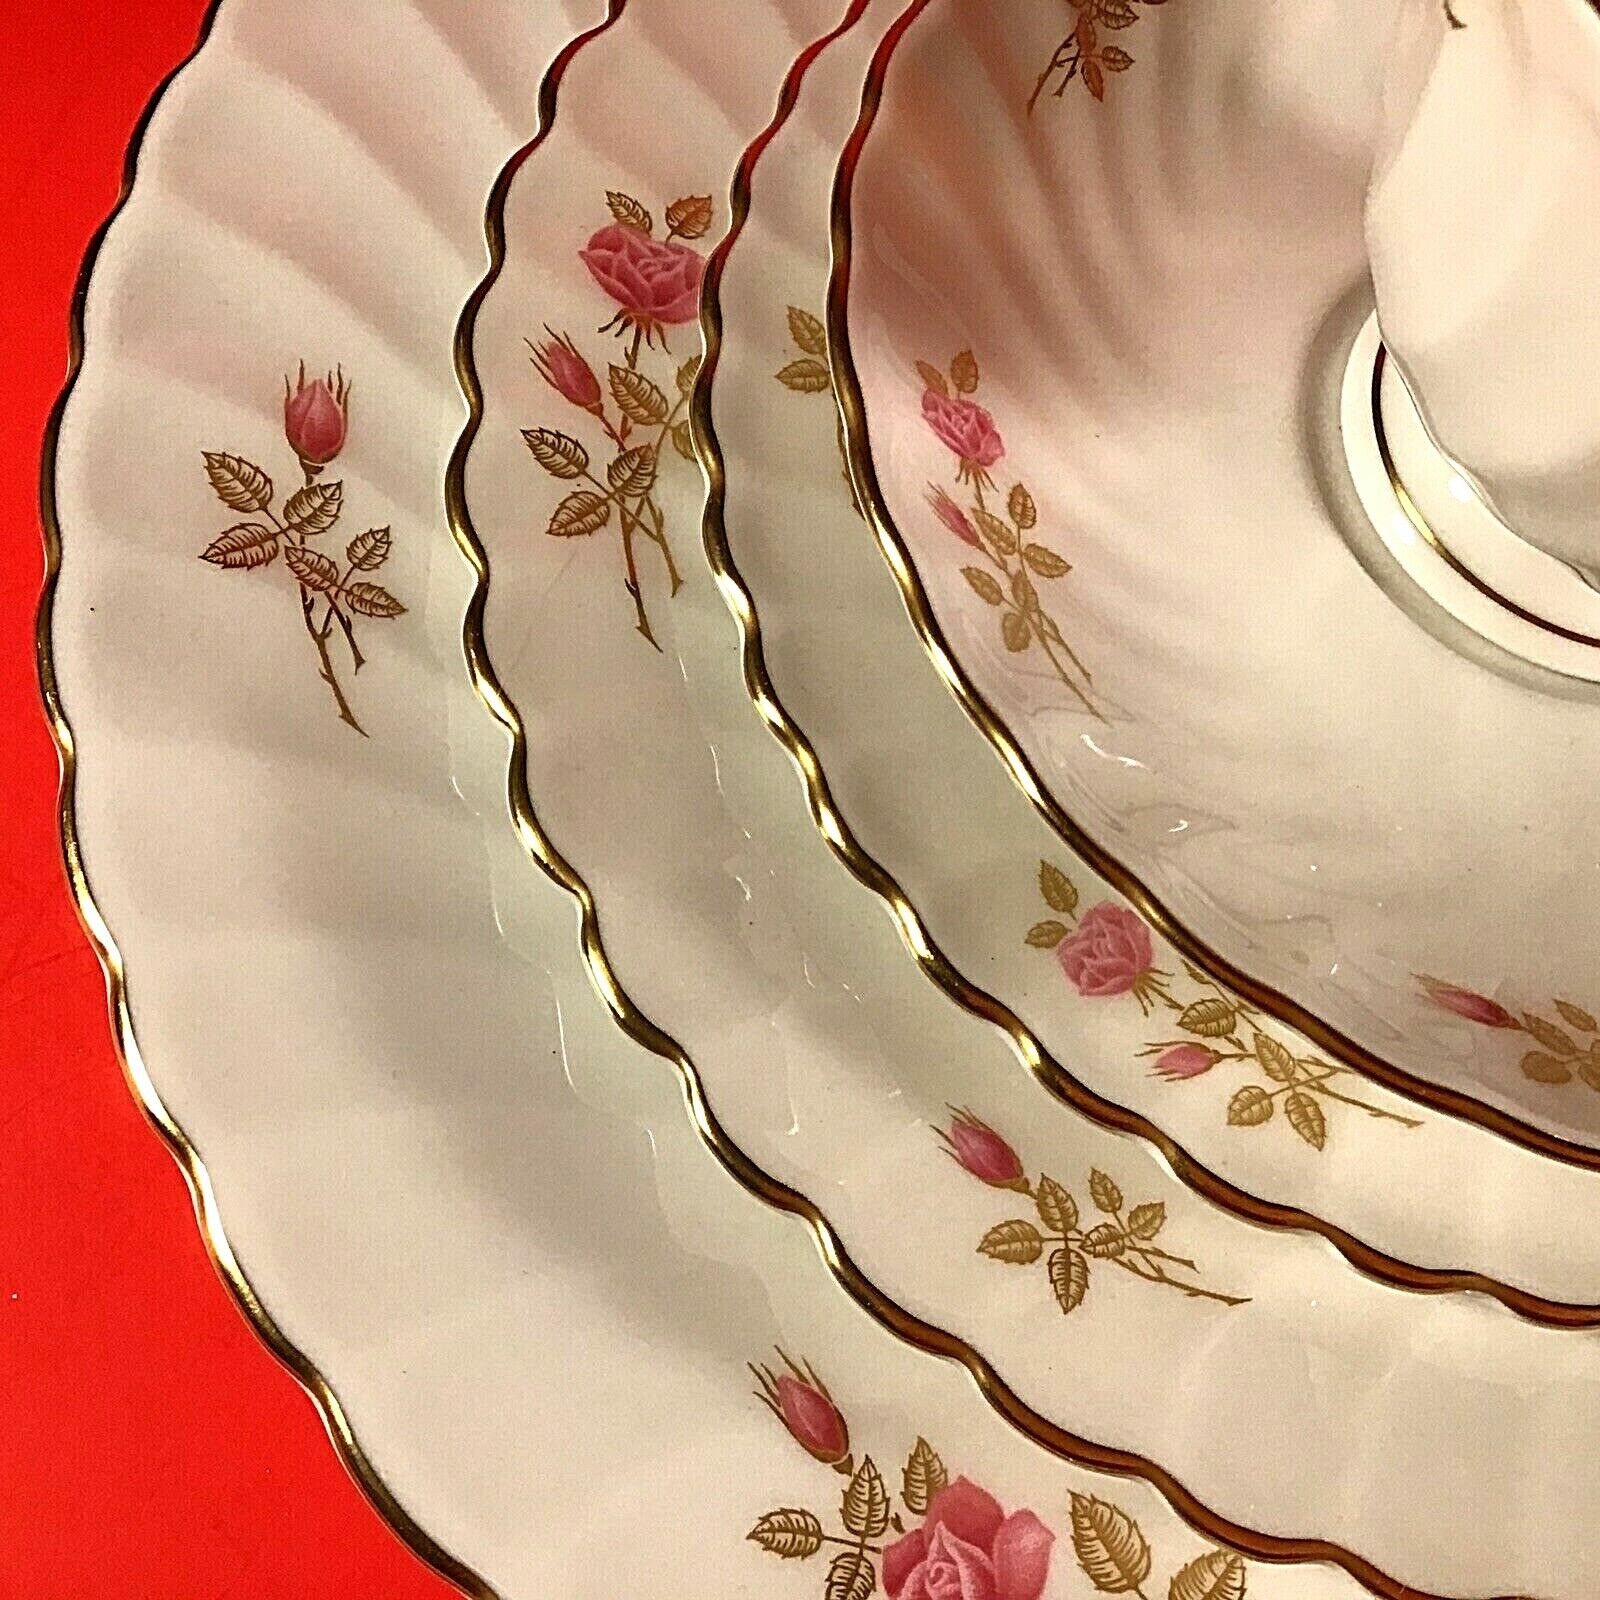 SYRACUSE CHINA COURTSHIP SILHOUETTE 5 PIECE PLACE SETTING PINK AND GOLD FLORAL syracuse china - фотография #2